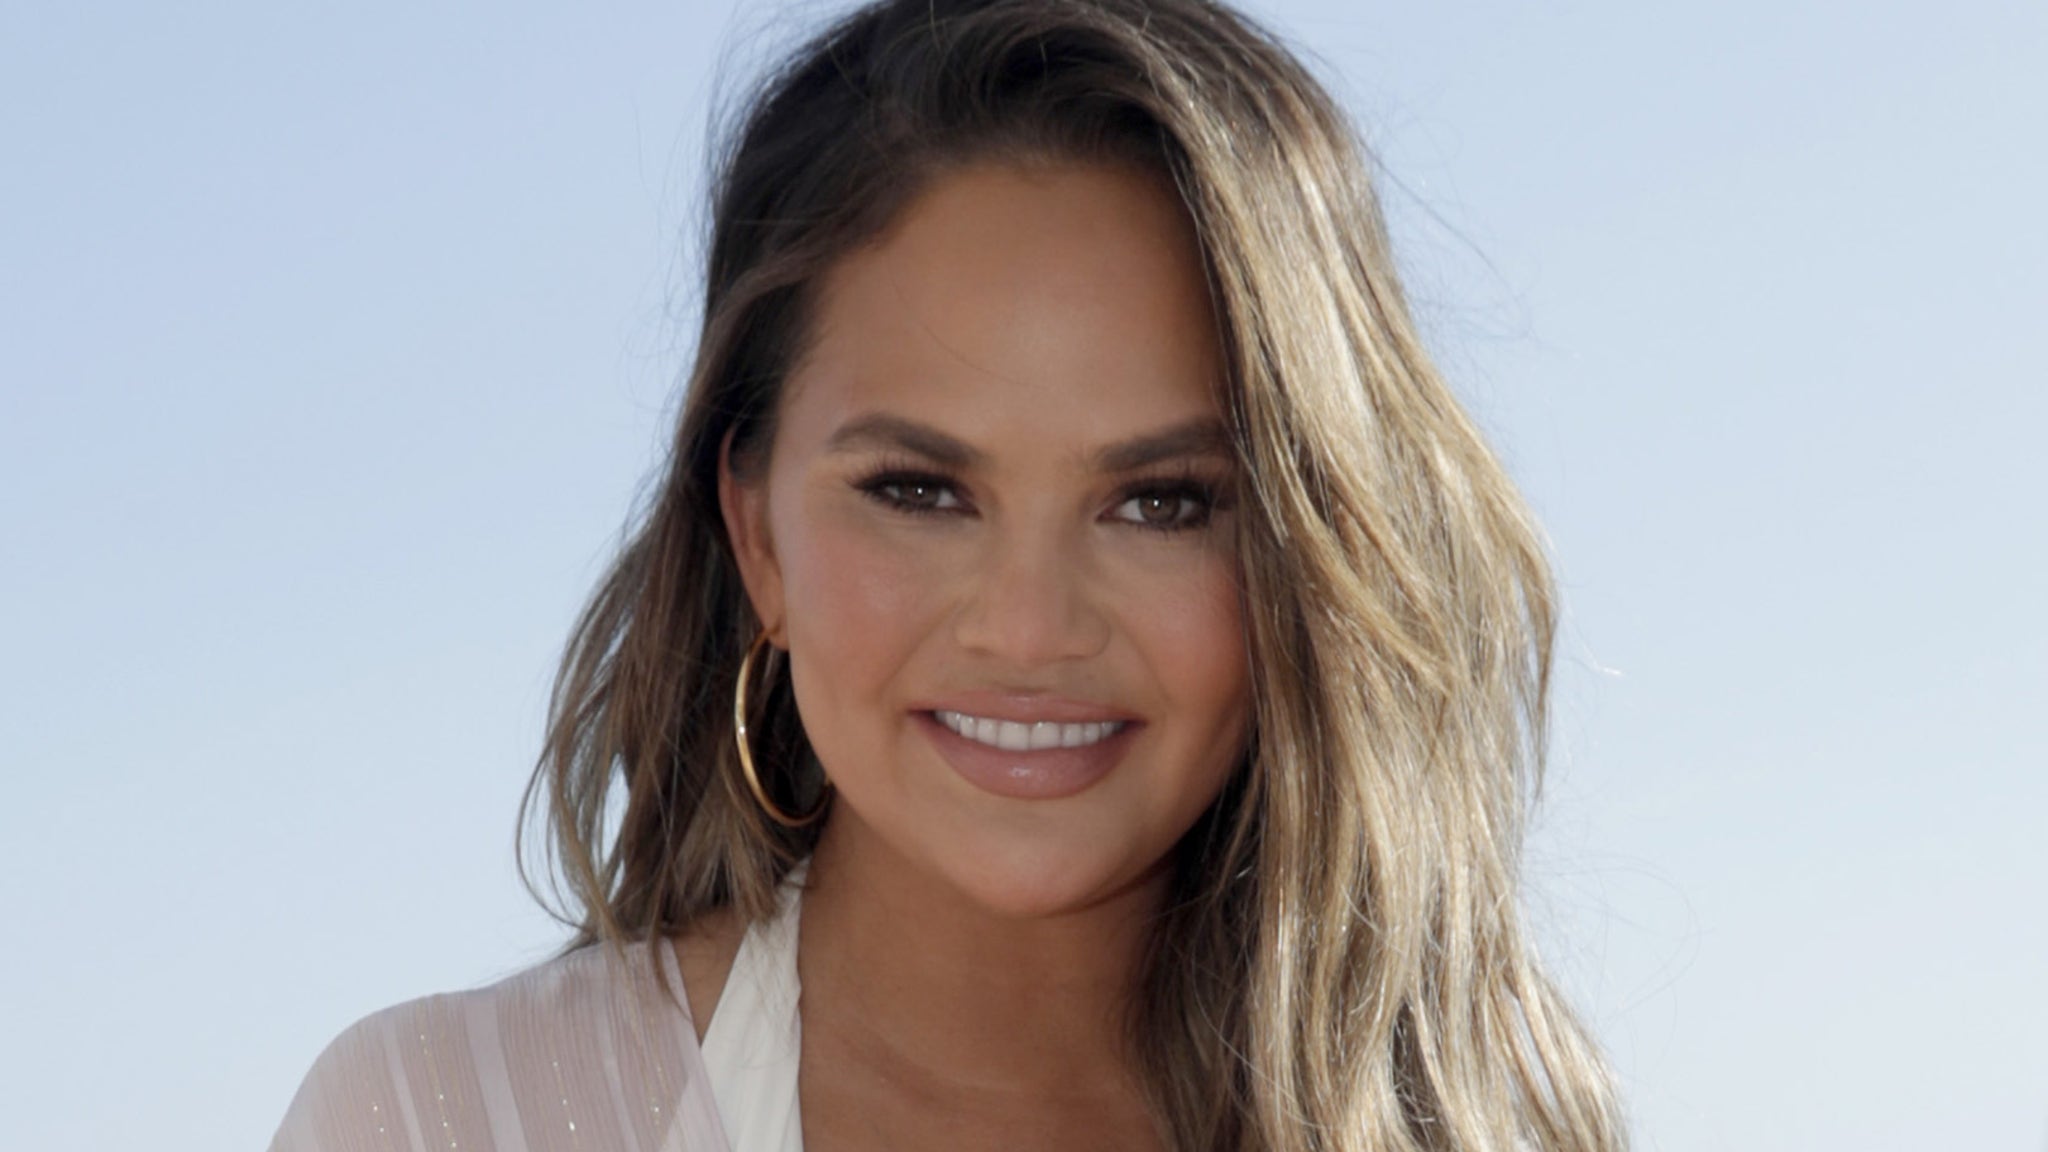 Chrissy Teigen Ditches Twitter Because She Can't 'Block Out the Negativity'